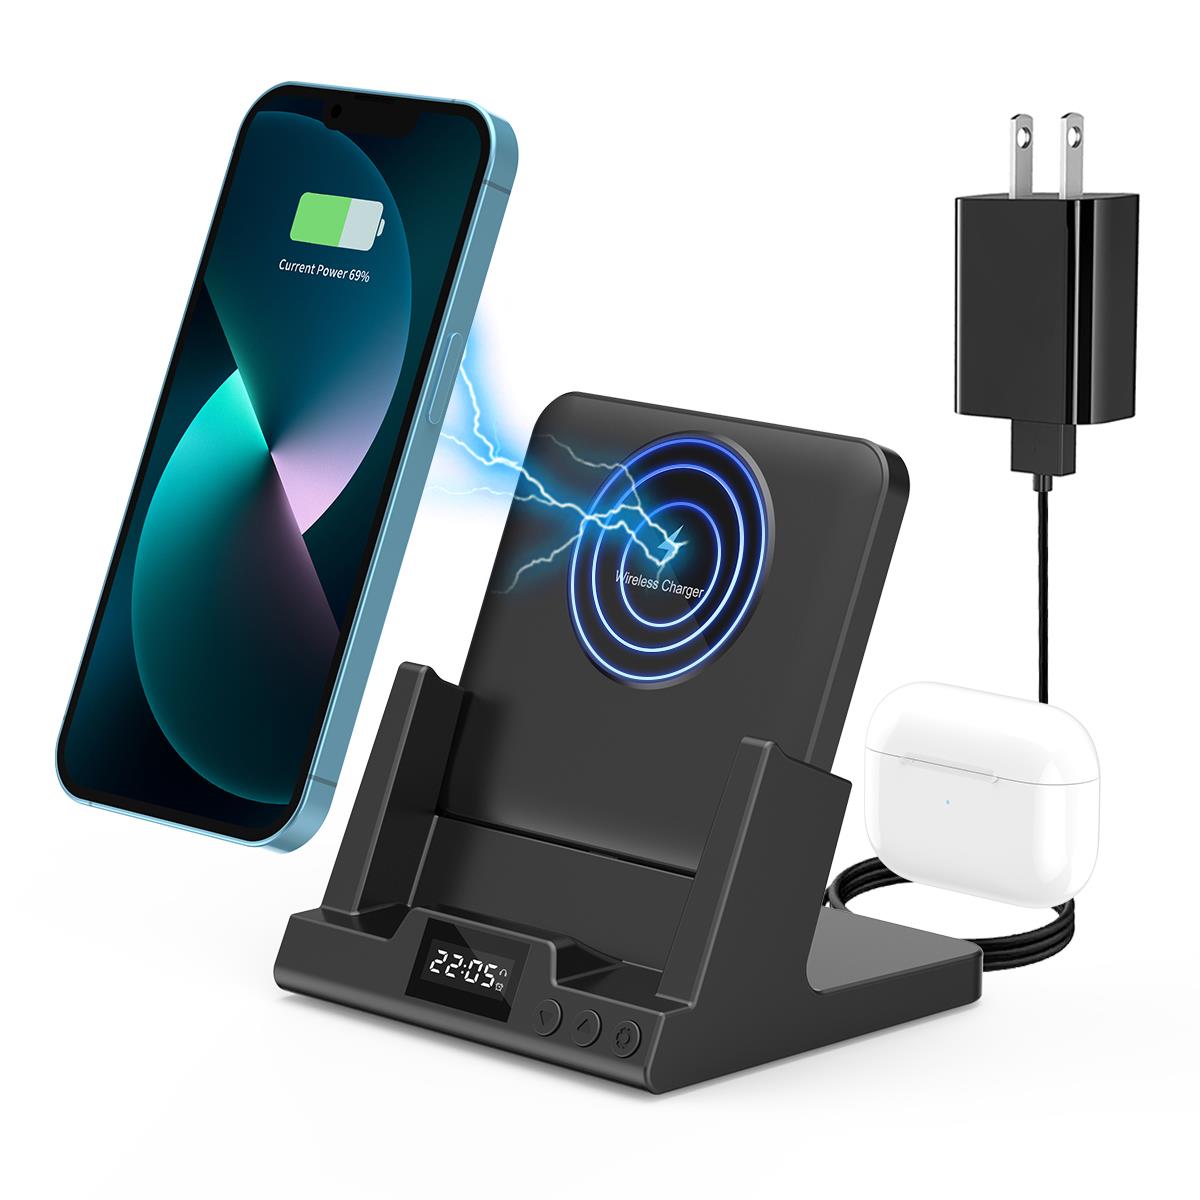 4 in 1 Wireless Charger With Alarm Clock, 15W Fast Wireless Charging Station for iPhone